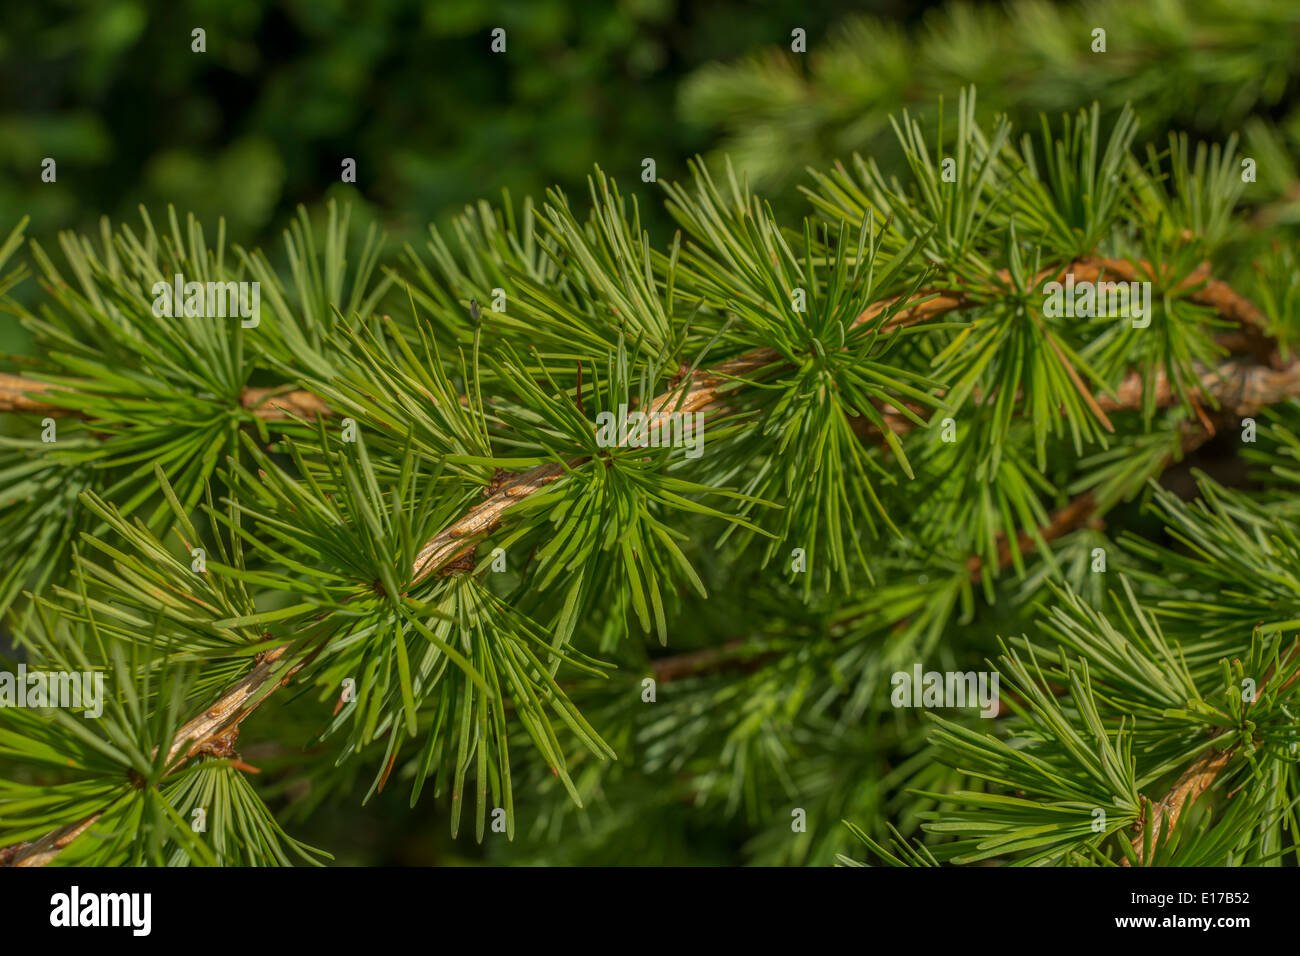 Leaf spikes of Larch (Larix sp.). Stock Photo